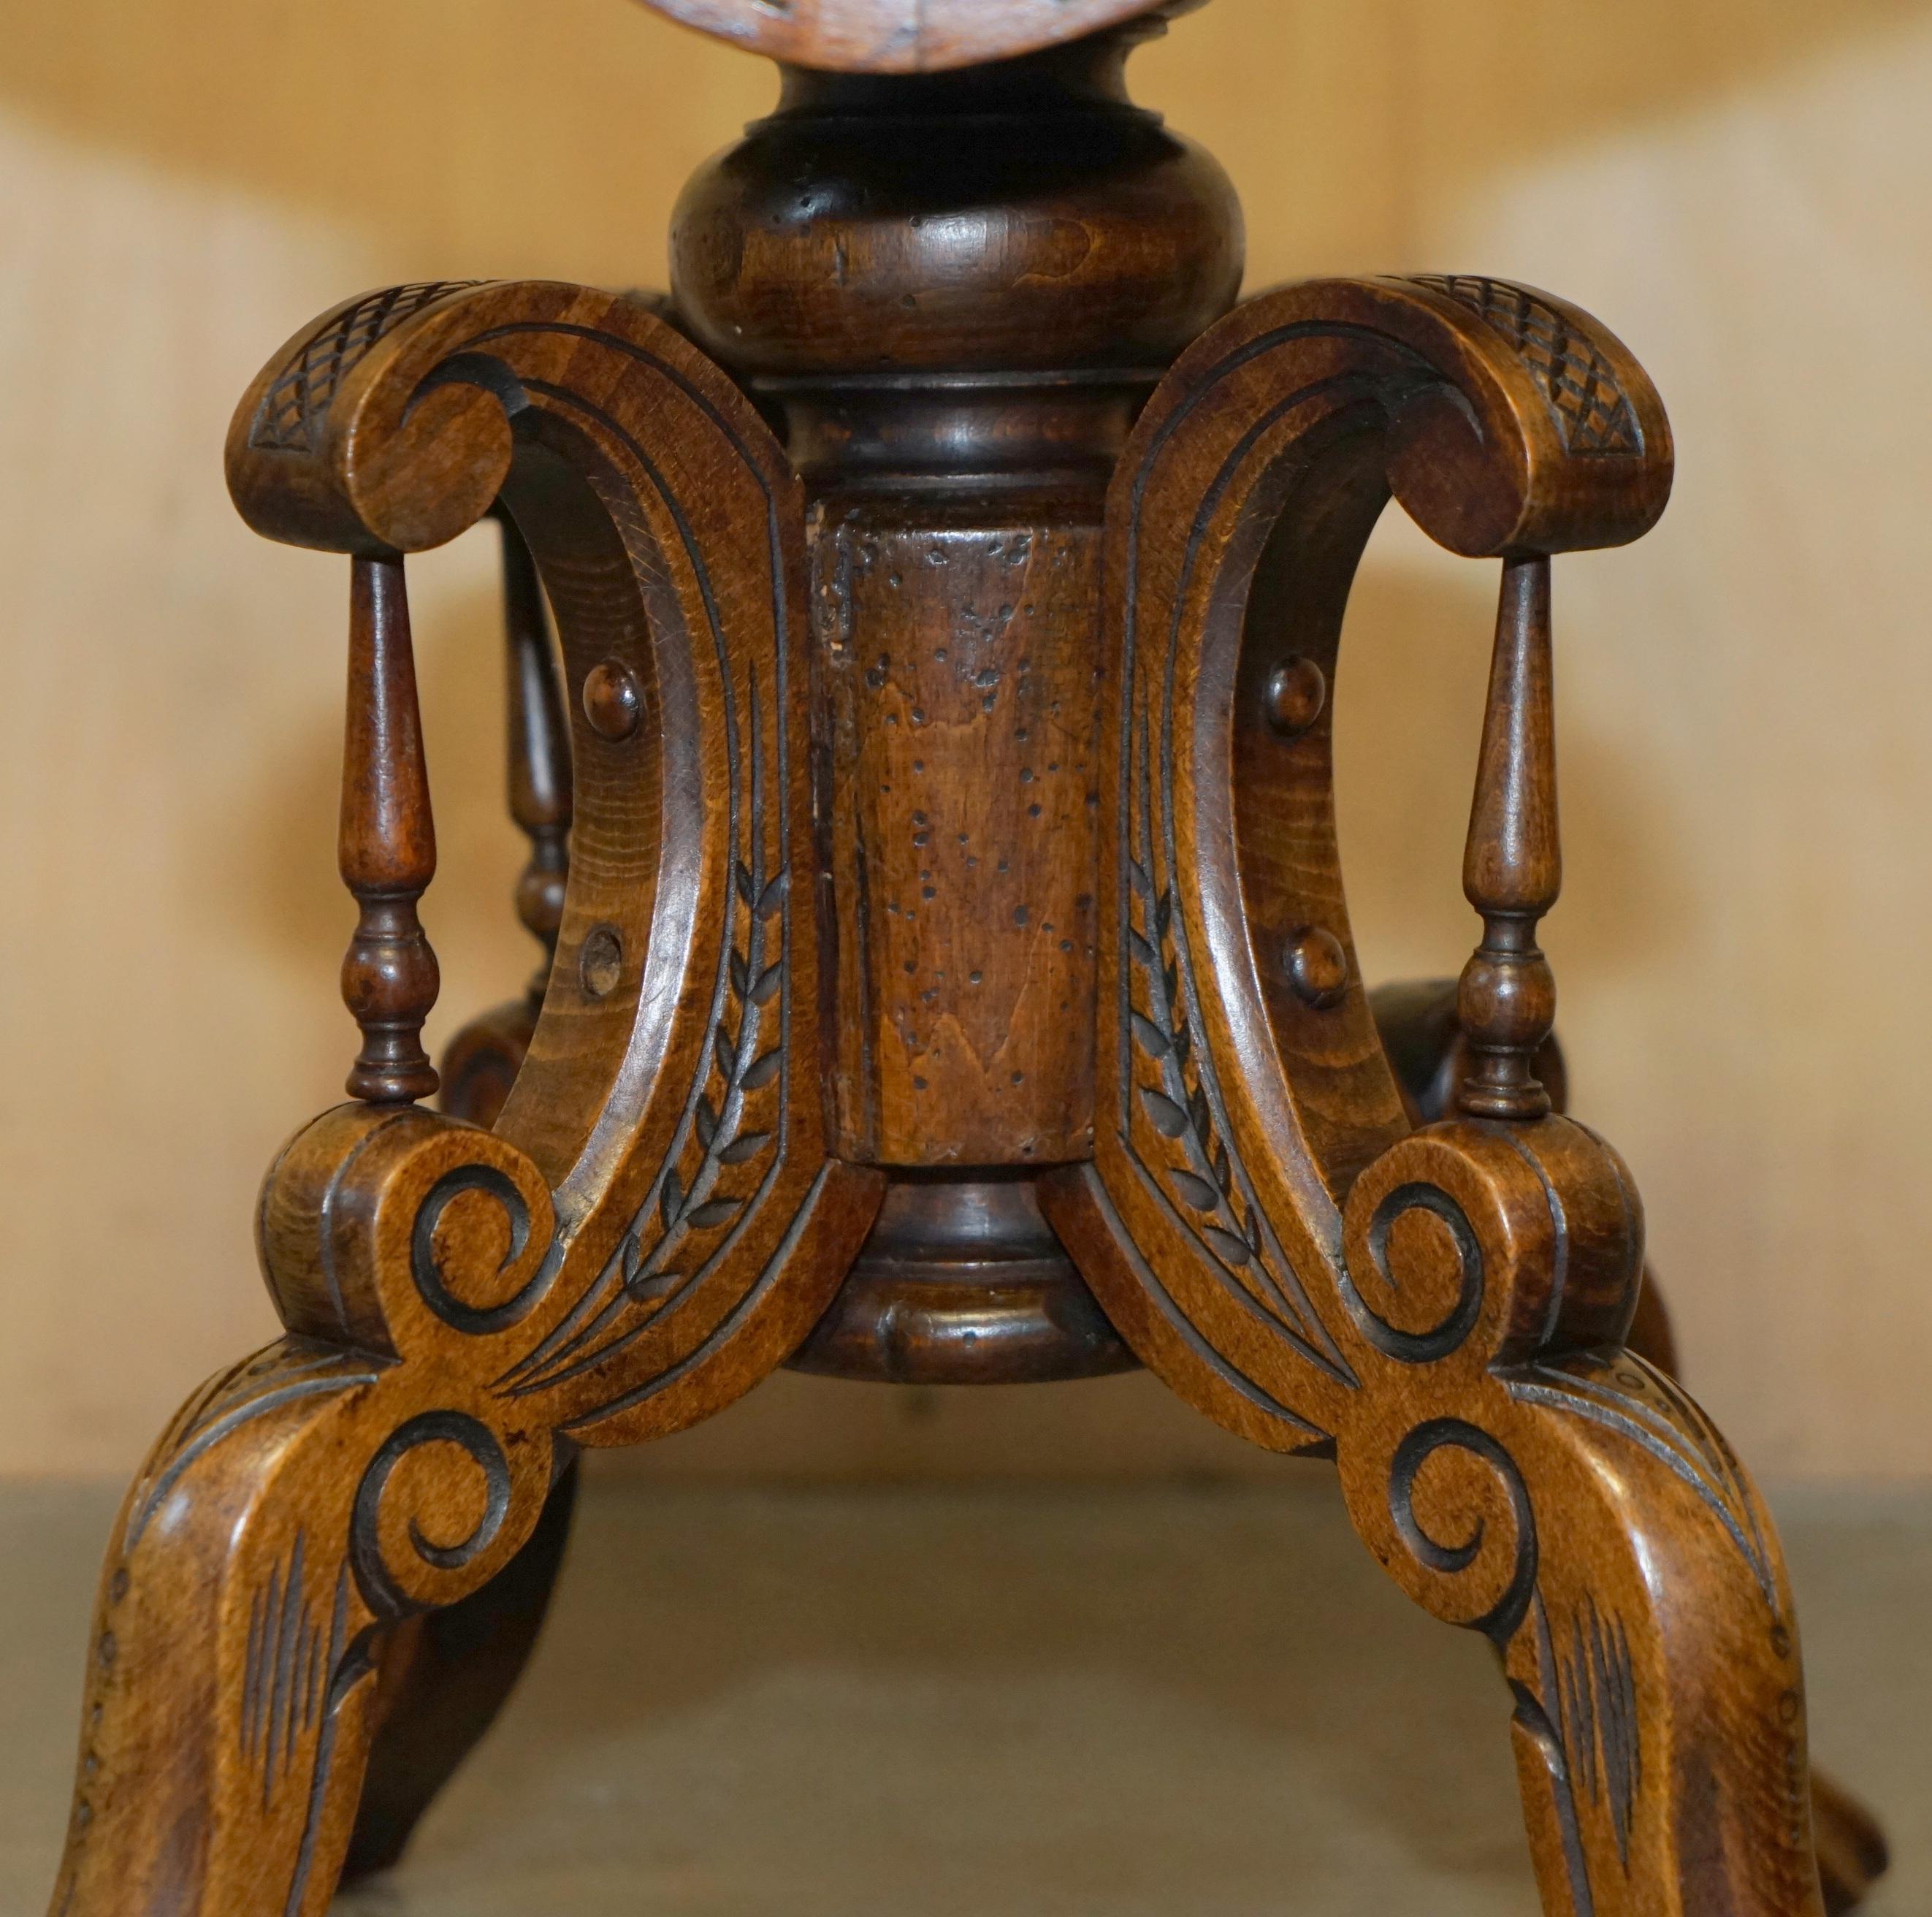 ViCtorian WALNUT MUSIC DRESSING TABLE STOOL DECORATIVE BASE CURVED SEAT ANTIQUE en vente 1